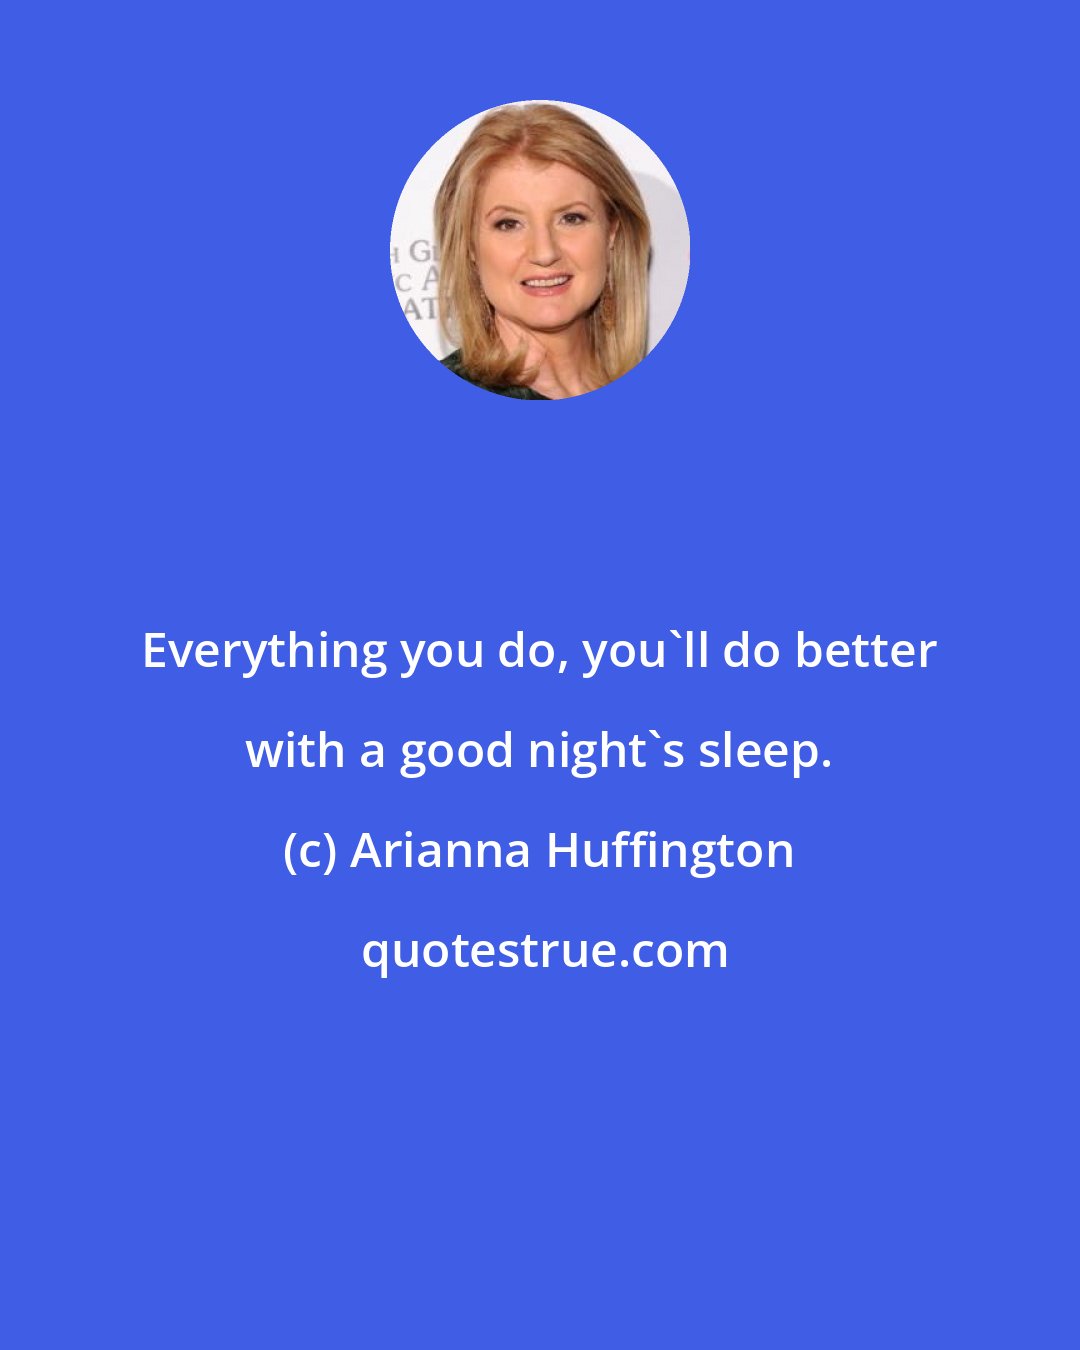 Arianna Huffington: Everything you do, you'll do better with a good night's sleep.